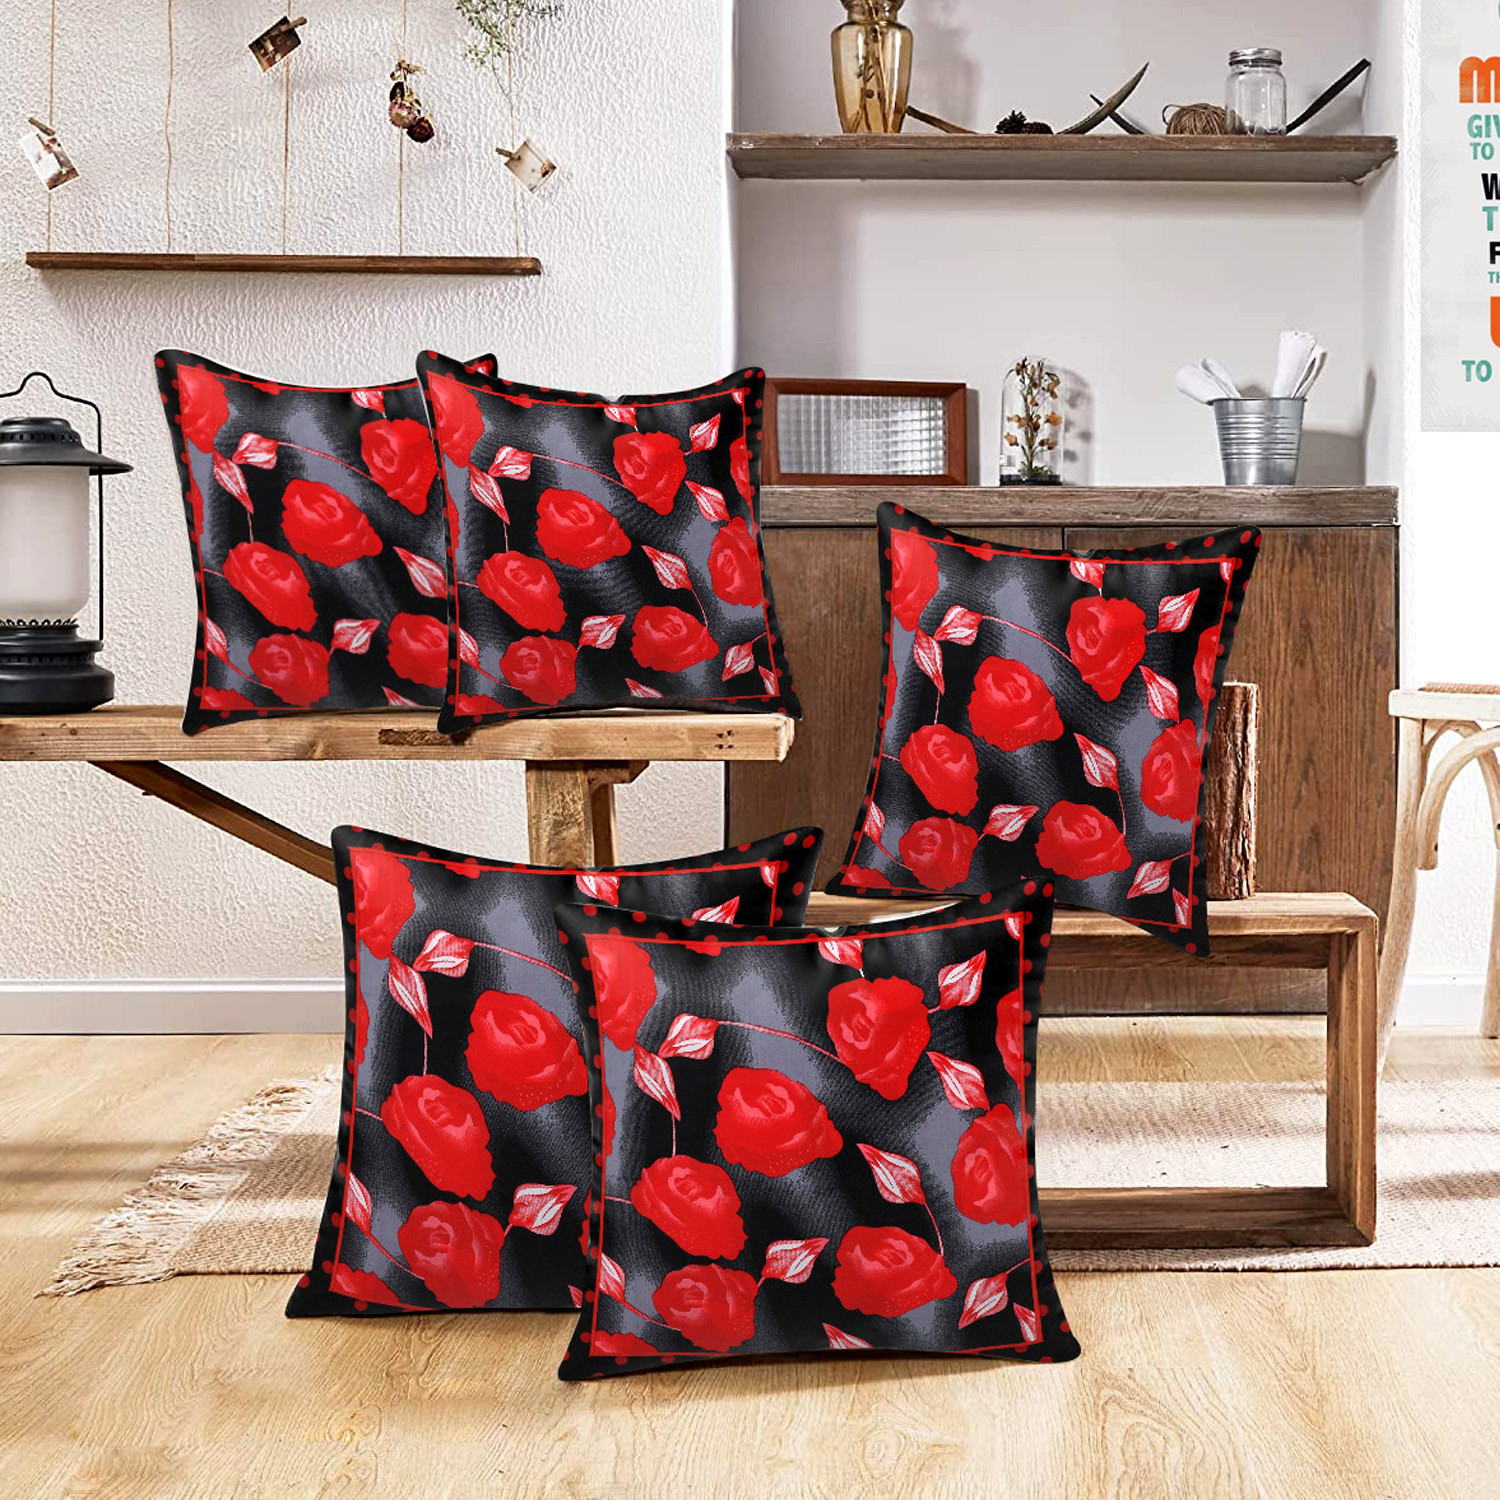 Kuber Industries Cushion Cover|Ractangle Cushion Covers|Sofa Cushion Covers|Cushion Covers 16 inch x 16 inch|Cushion Cover Set of 5|RED